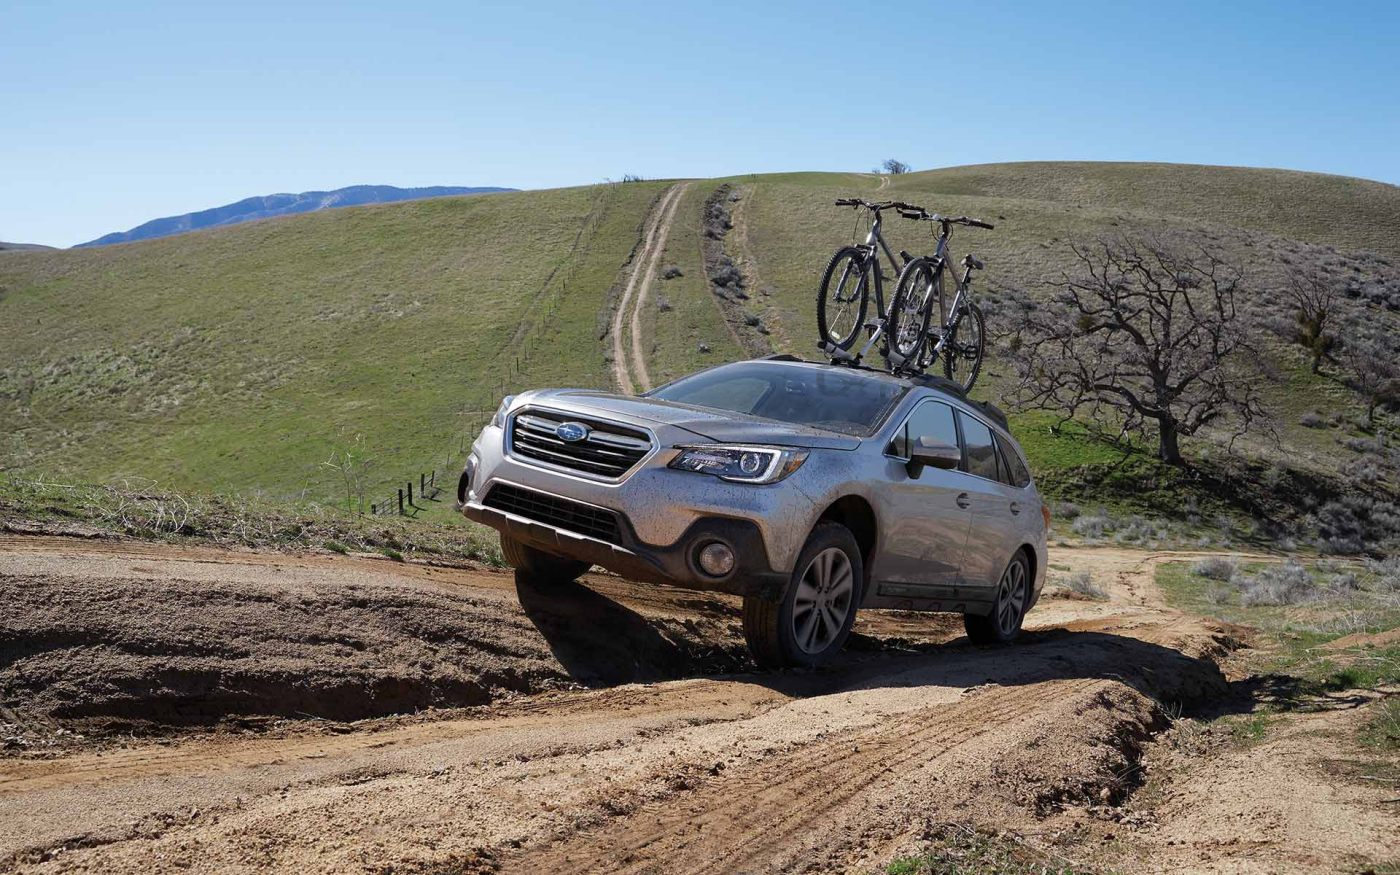 2018 Subaru Outback 8.7 Inches of Ground Clearance and X-MODE